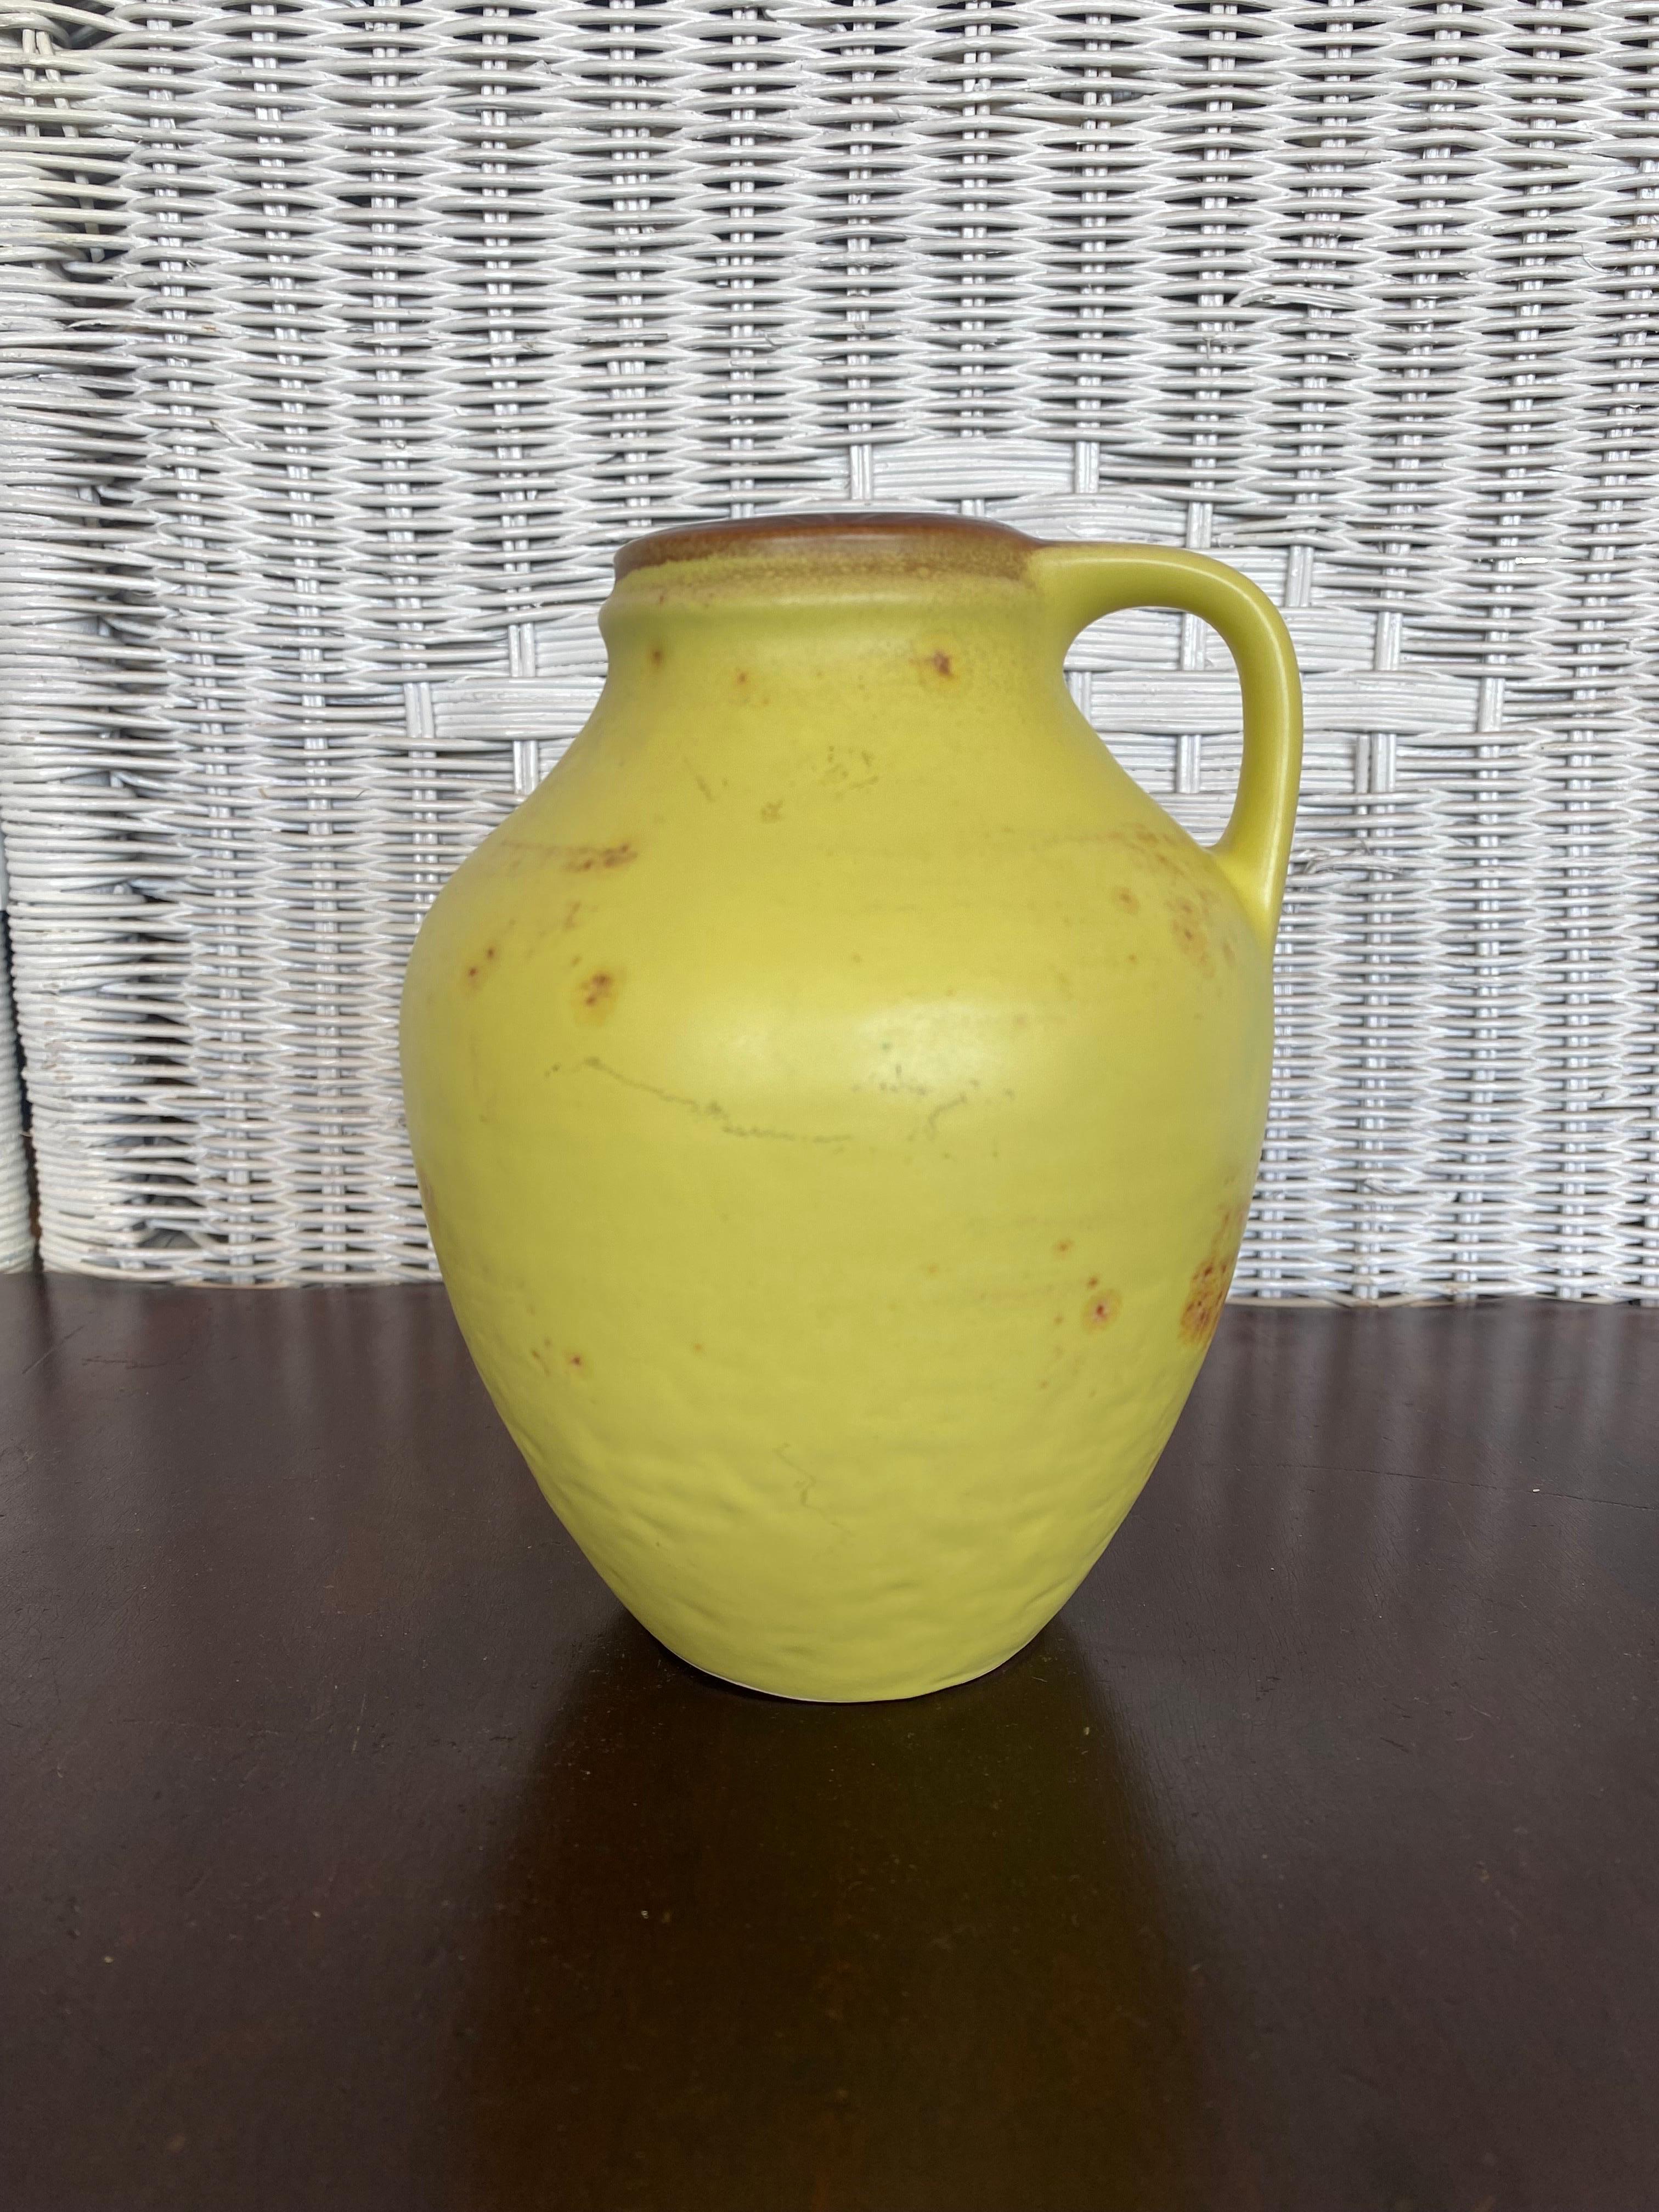 Gorgeous little vase, carafe, urn or vessel with handle in mustard yellow with brown accents. The vase is marked on the bottom with W-GERM. C874-15, with the first part referring to the former country West-Germany.

This beautiful little gem is in